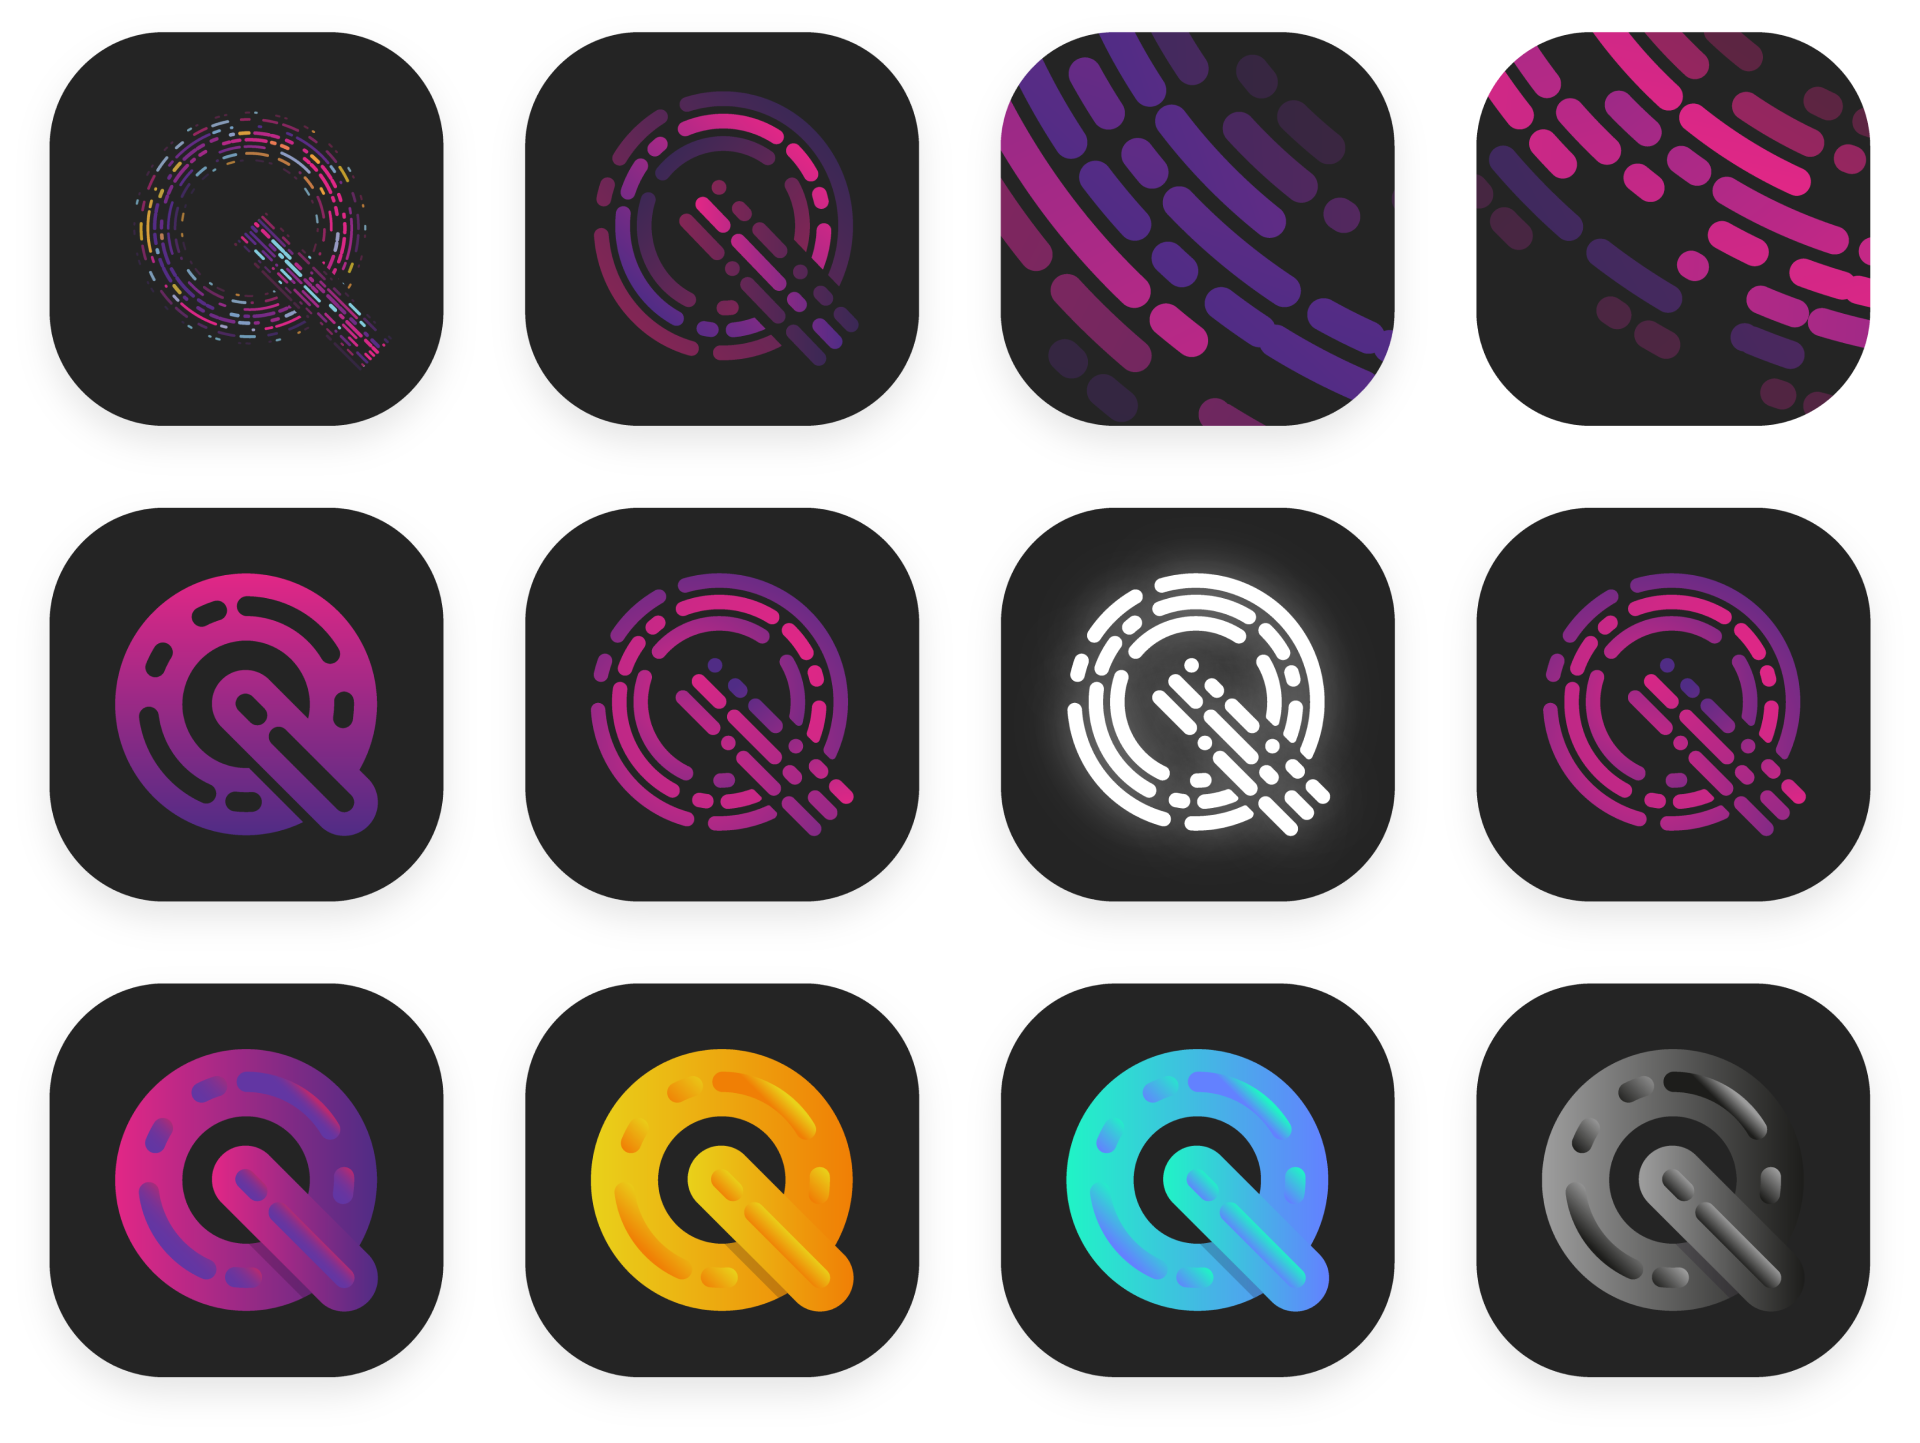 A variety of "Q"-shaped logo ideas in purples and pinks